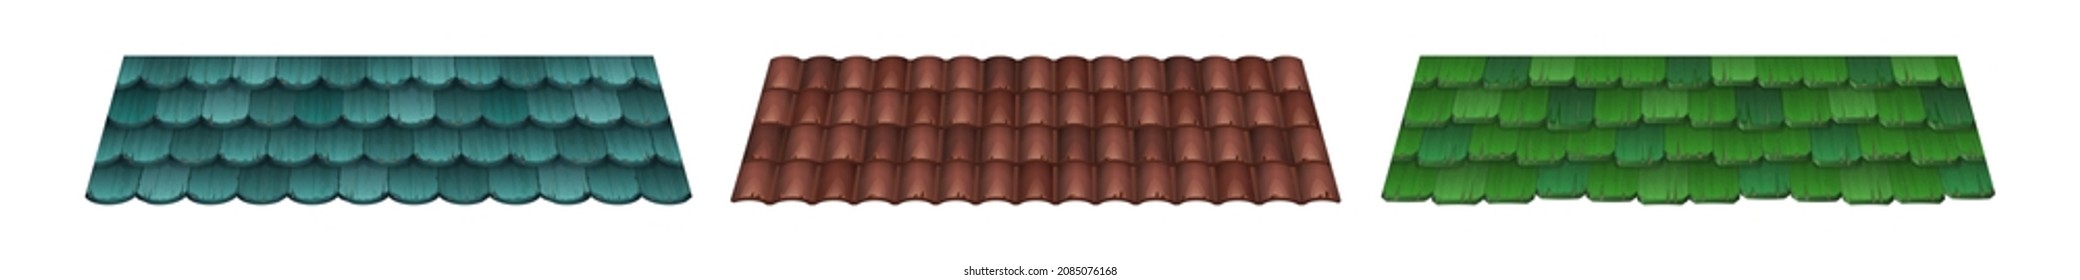 Roof tile textures, traditional house cover with rounded wooden and wave clay tiles. Vector cartoon set of blue, green and brown rooftop of buildings isolated on white background